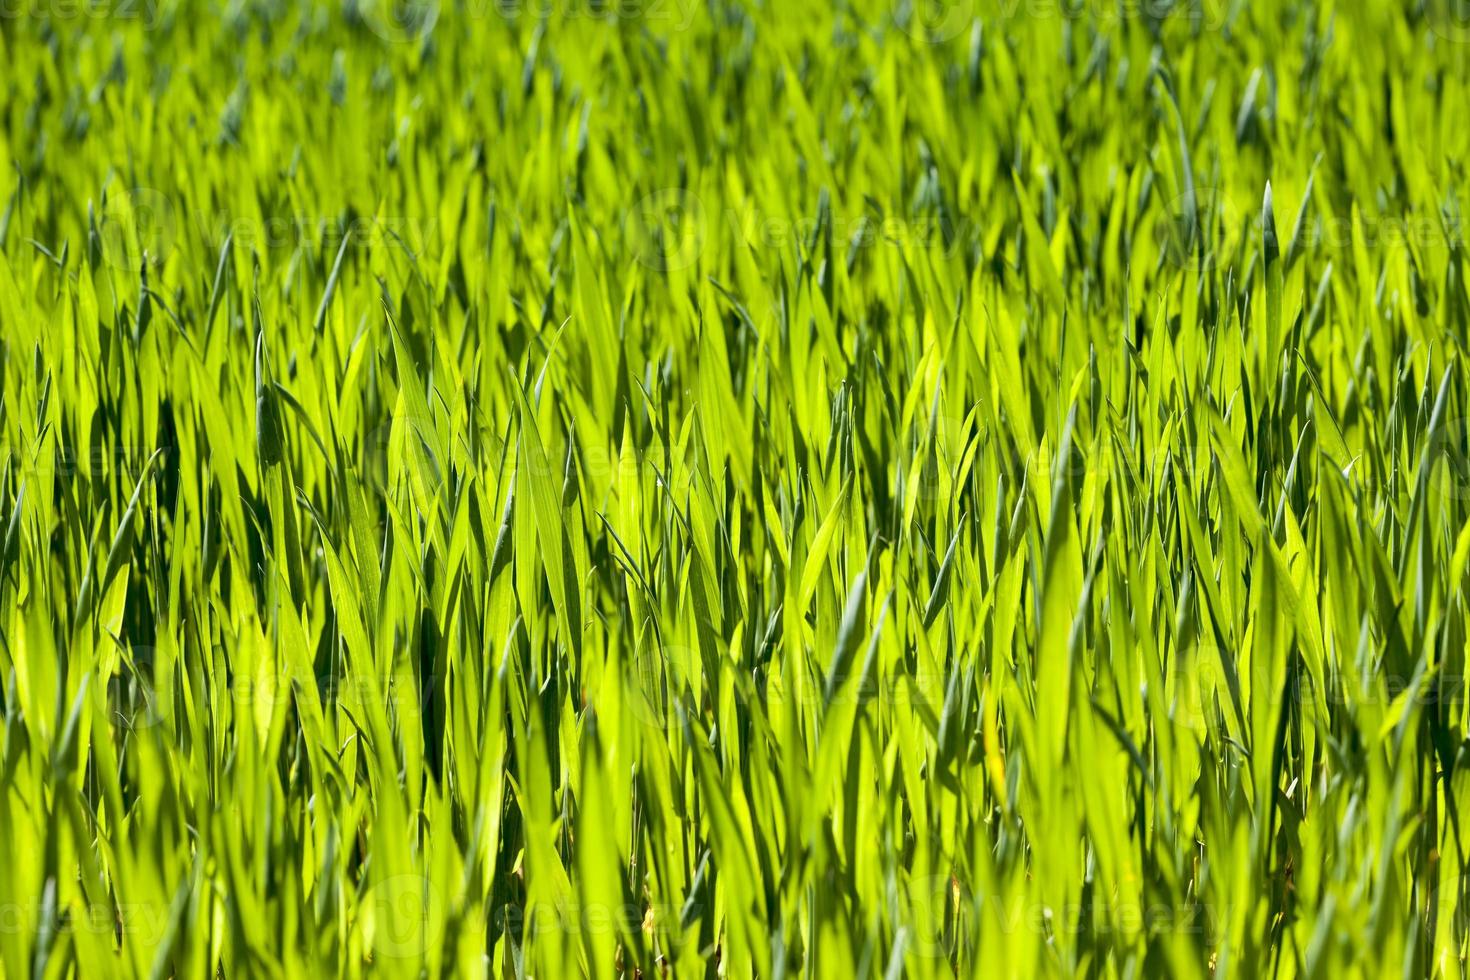 green wheat or other cereals on agricultural land photo